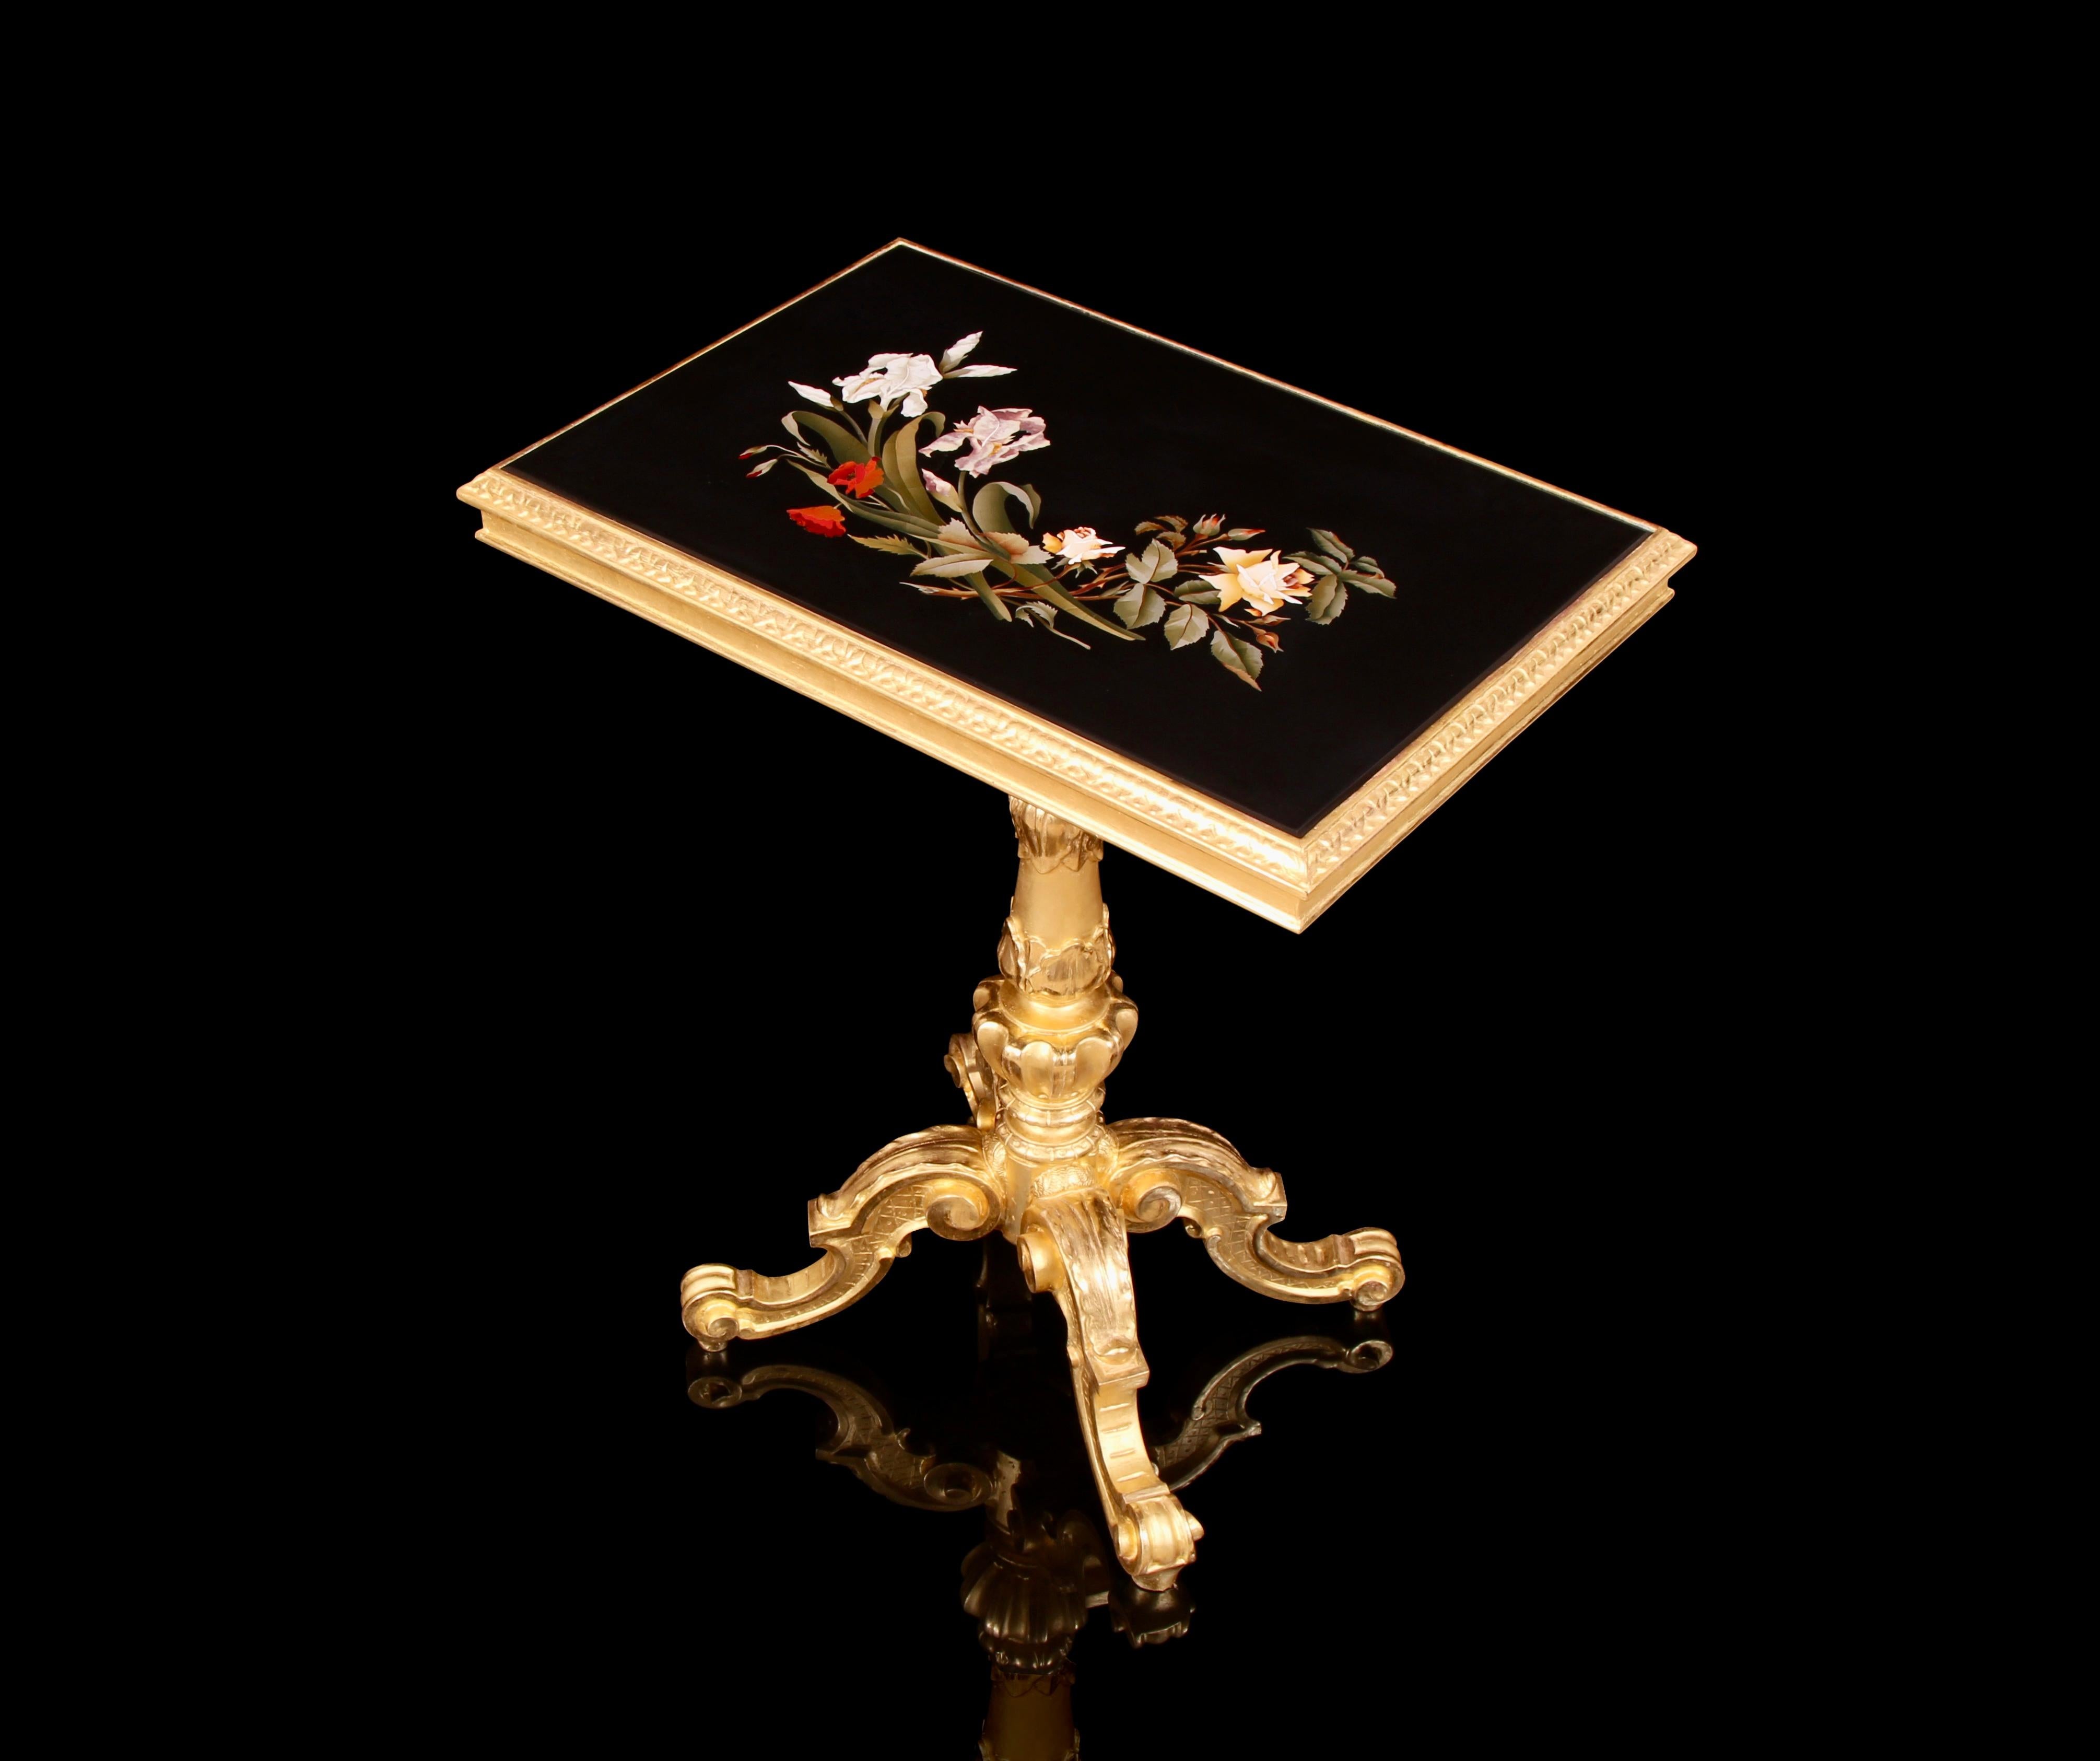 Important Palatial & Rare 19th Century Pietra Dura Giltwood Centre Table. This magnificent rectangular table incorporates an exquisitely inlaid Florentine Pietra Dura work of art. The truly incredibly and colourful hardstone specimens have been